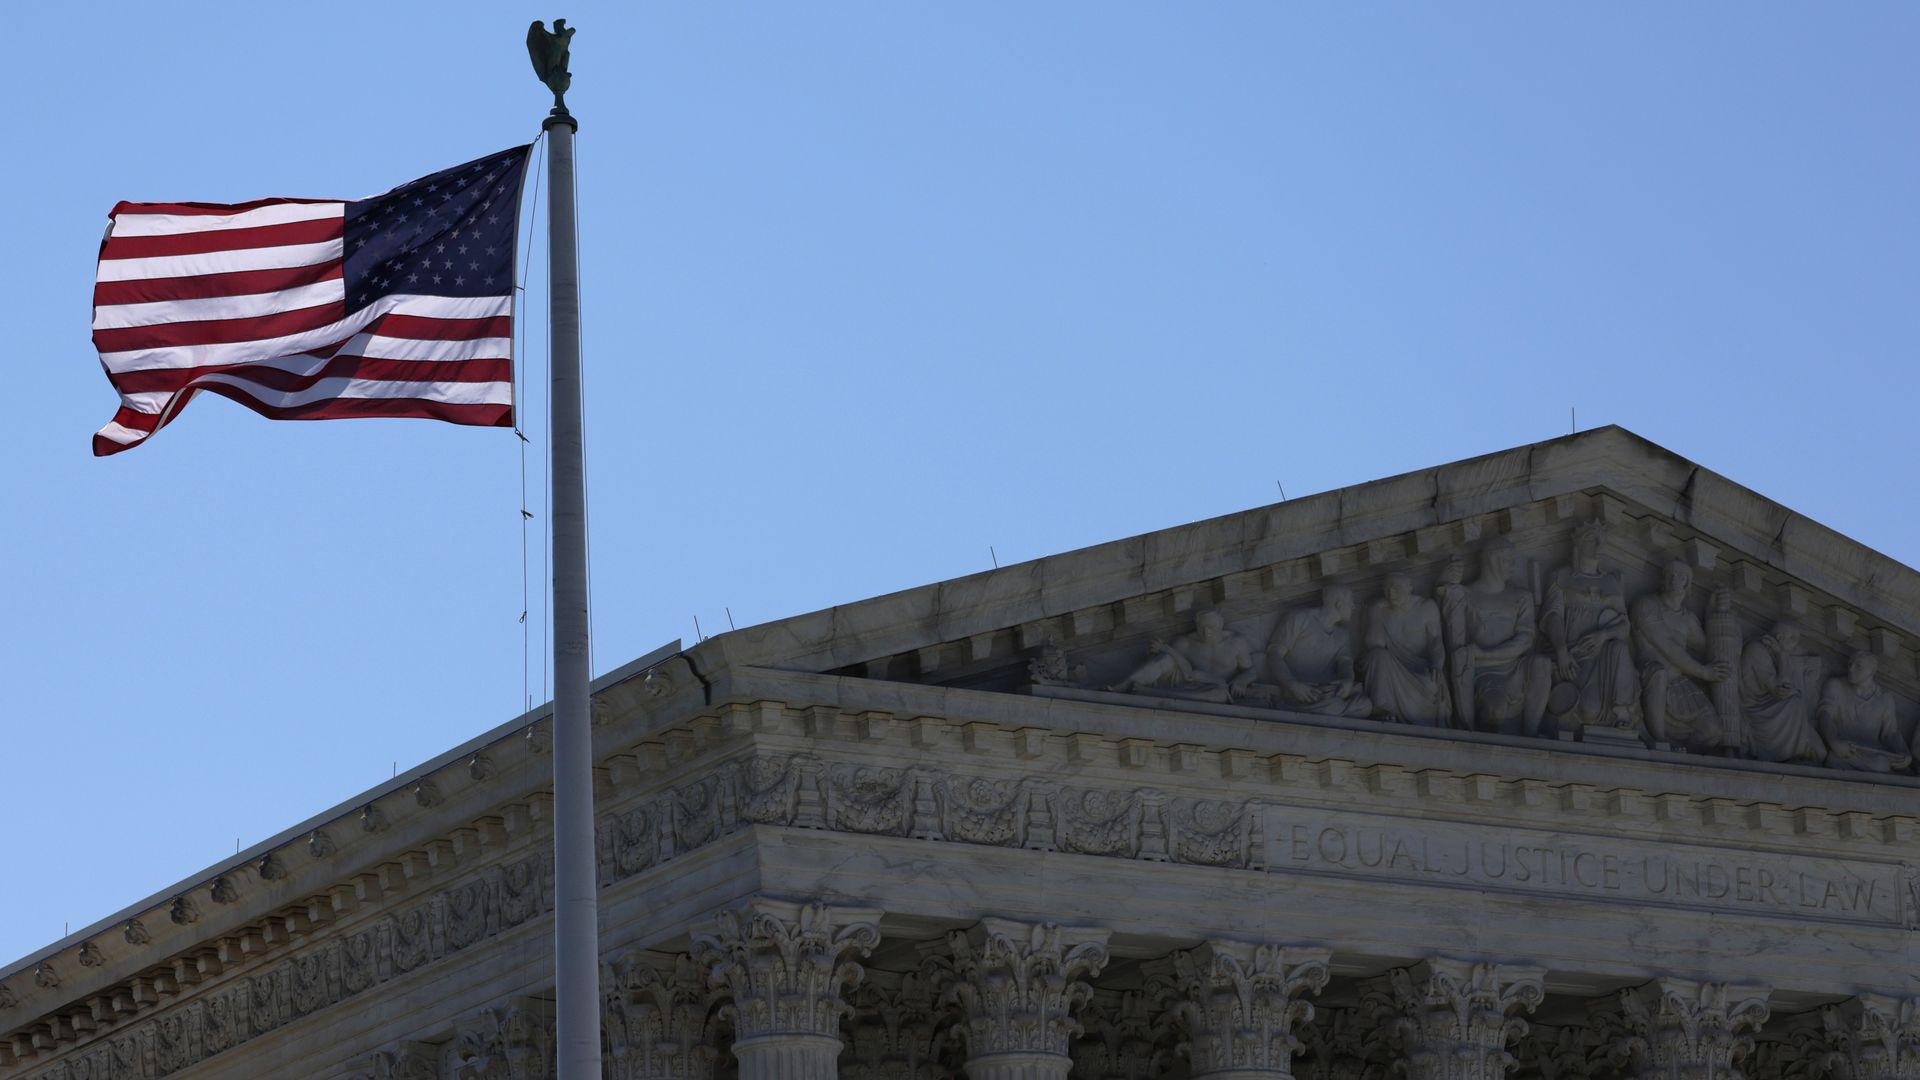 A photograph of the Supreme Court building and an American flag flying in front of it.